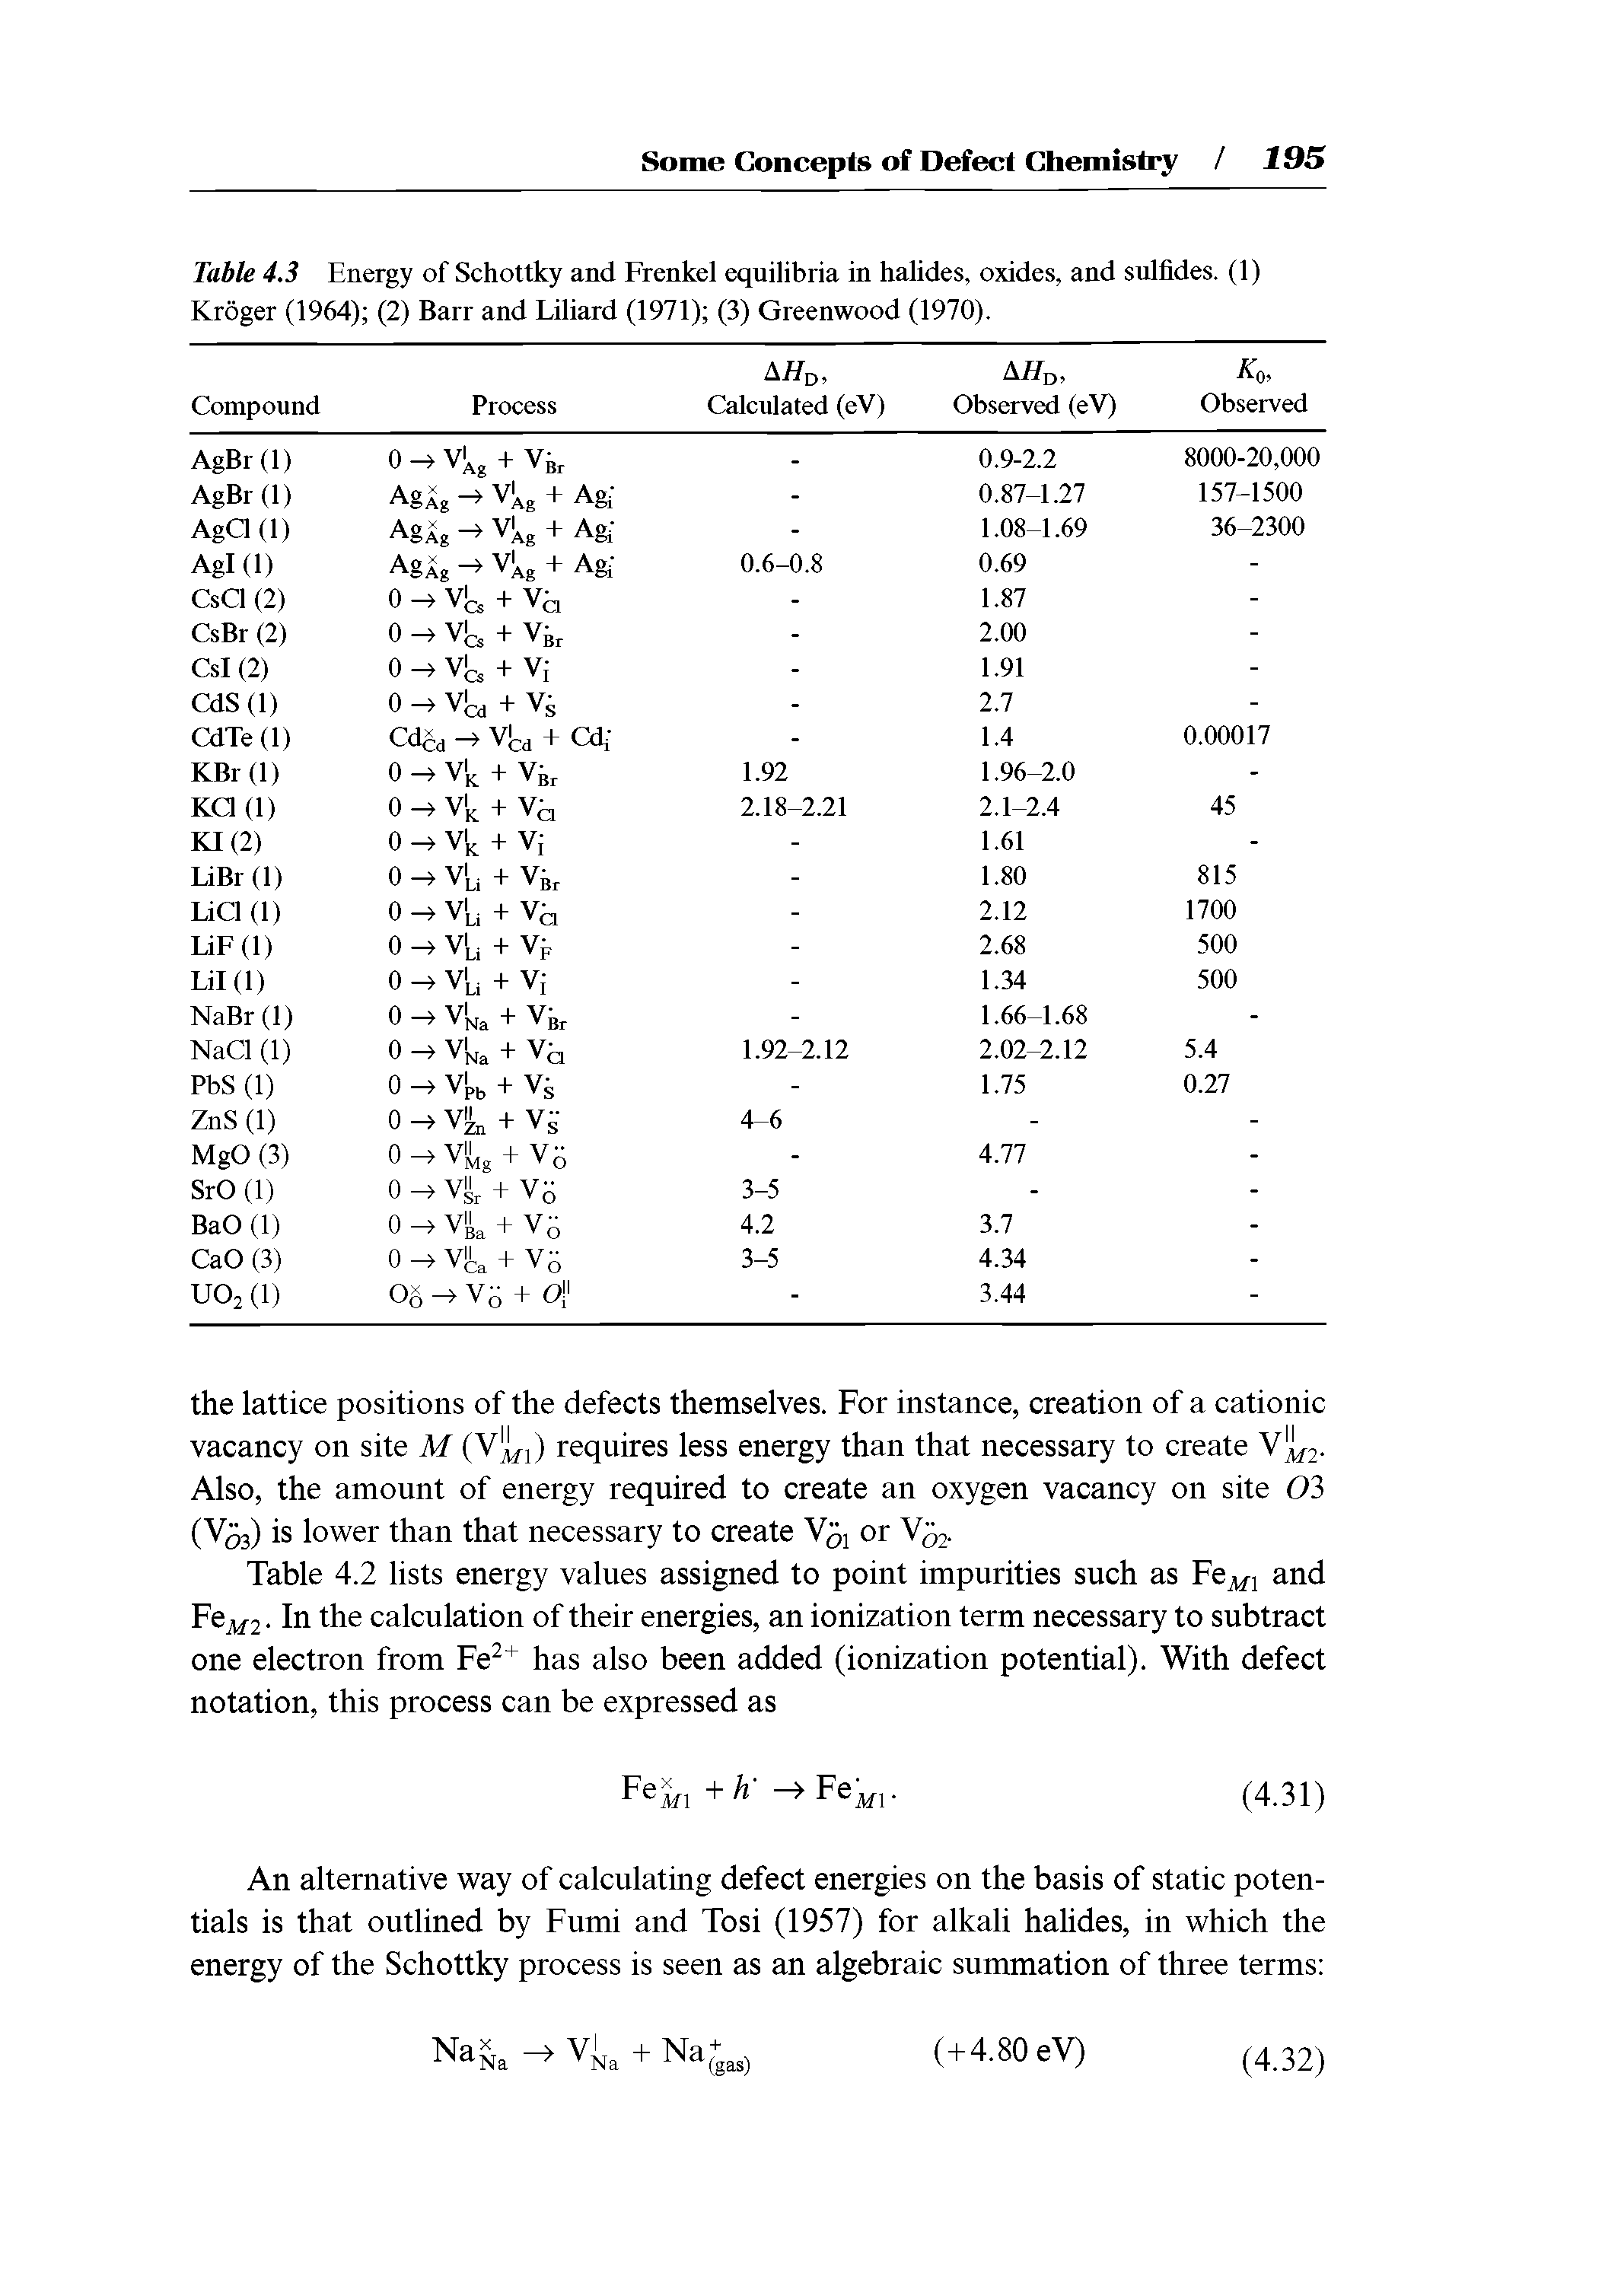 Table 4.3 Energy of Schottky and Frenkel equilibria in halides, oxides, and sulfides. (1) Kroger (1964) (2) Barr and Liliard (1971) (3) Greenwood (1970). ...